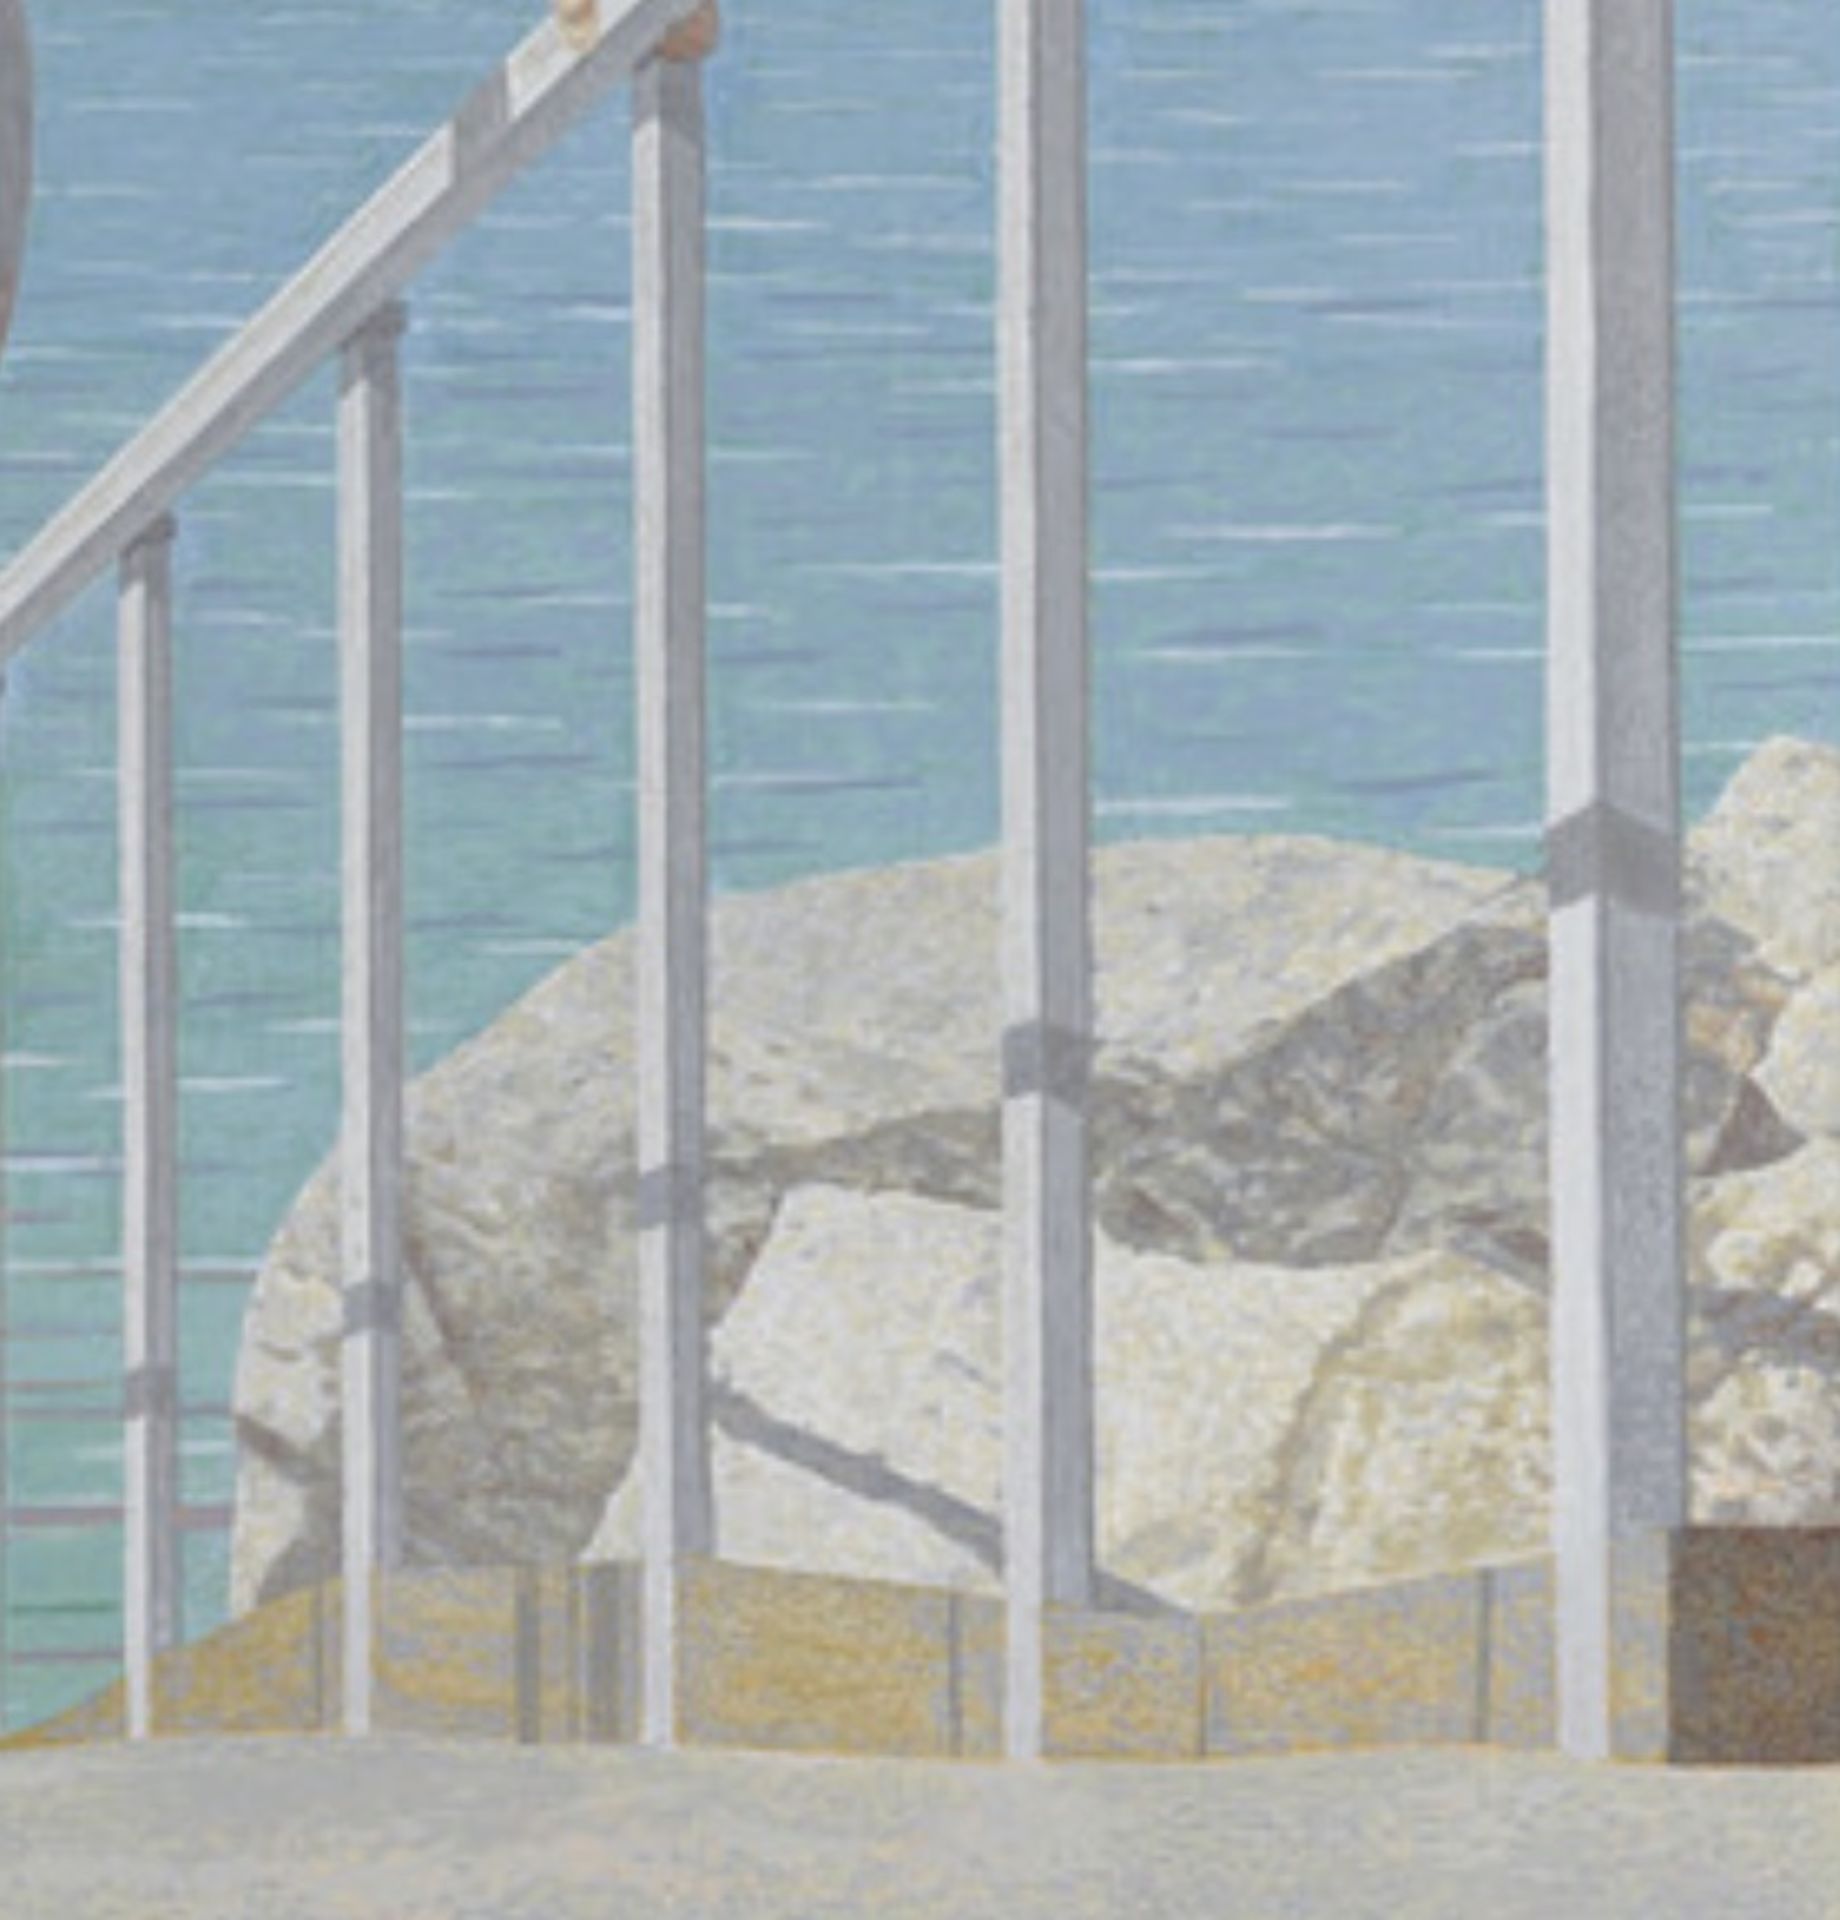 Alex Colville "A Woman on a Ramp, 2006" Offset Lithograph - Image 6 of 6